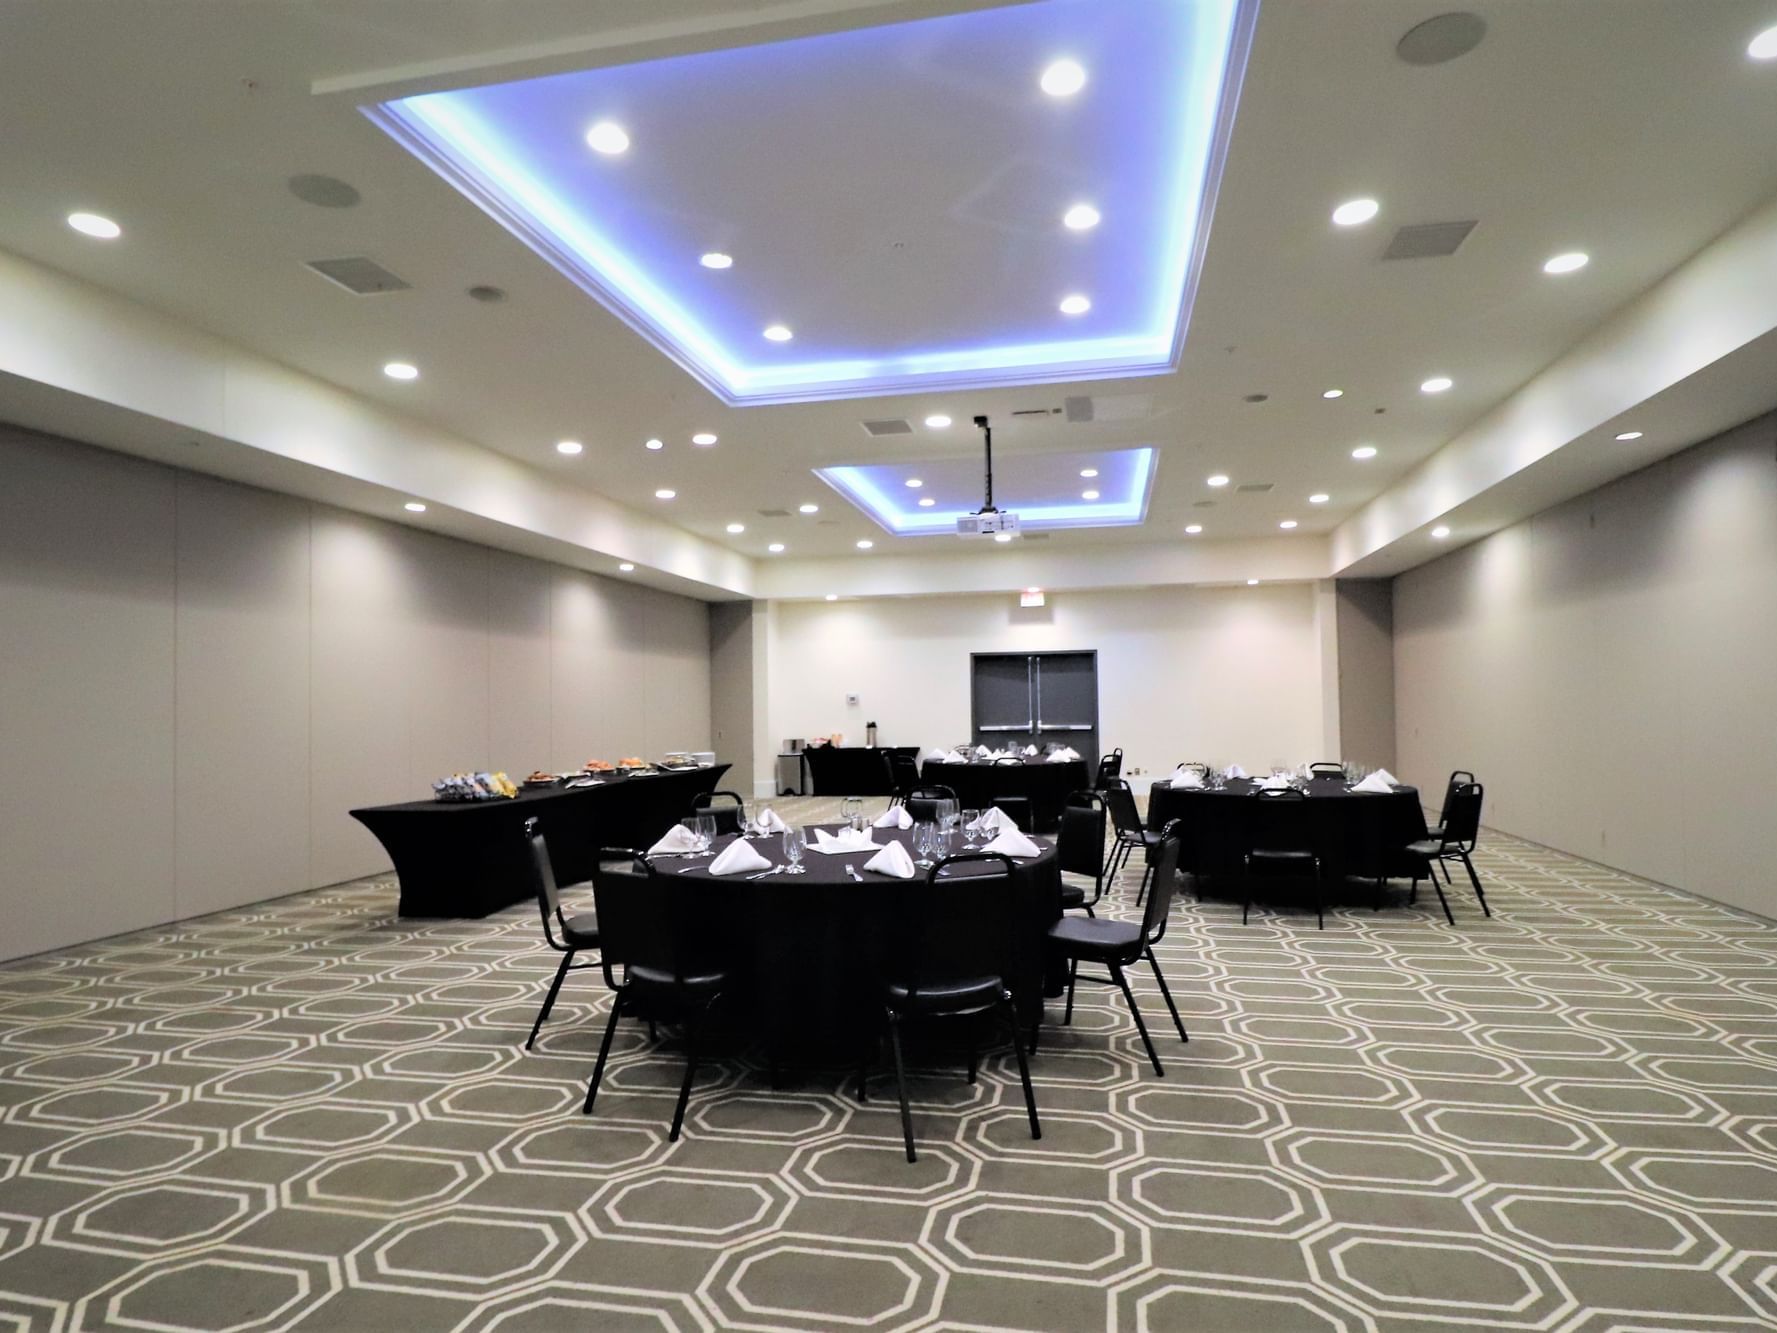 Banquet round tables arranged in Aspire at Harborside Hotel